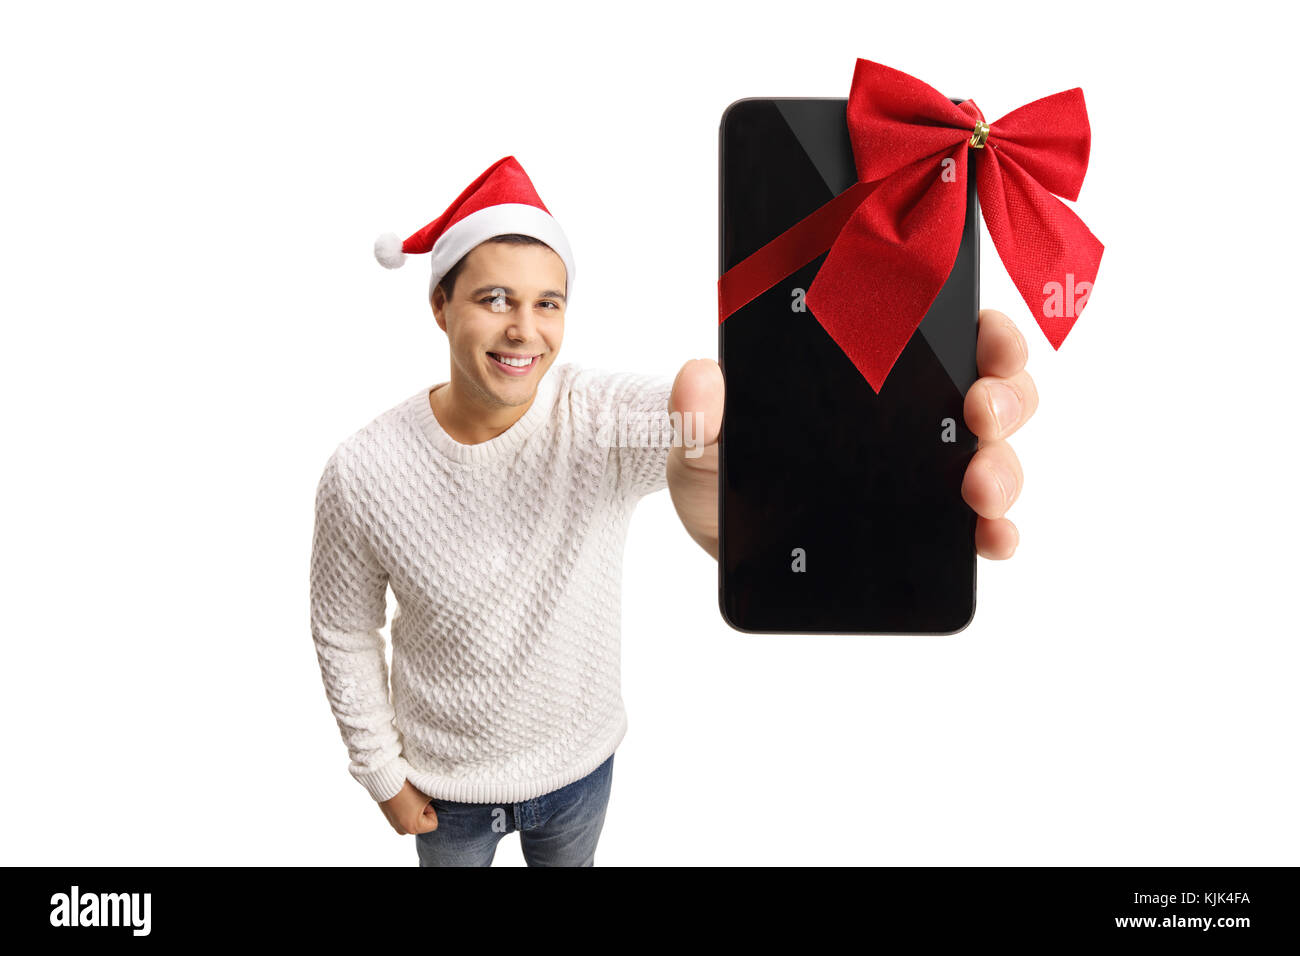 Young man with a santa hat showing a phone wrapped with red ribbon as a gift isolated on white background Stock Photo